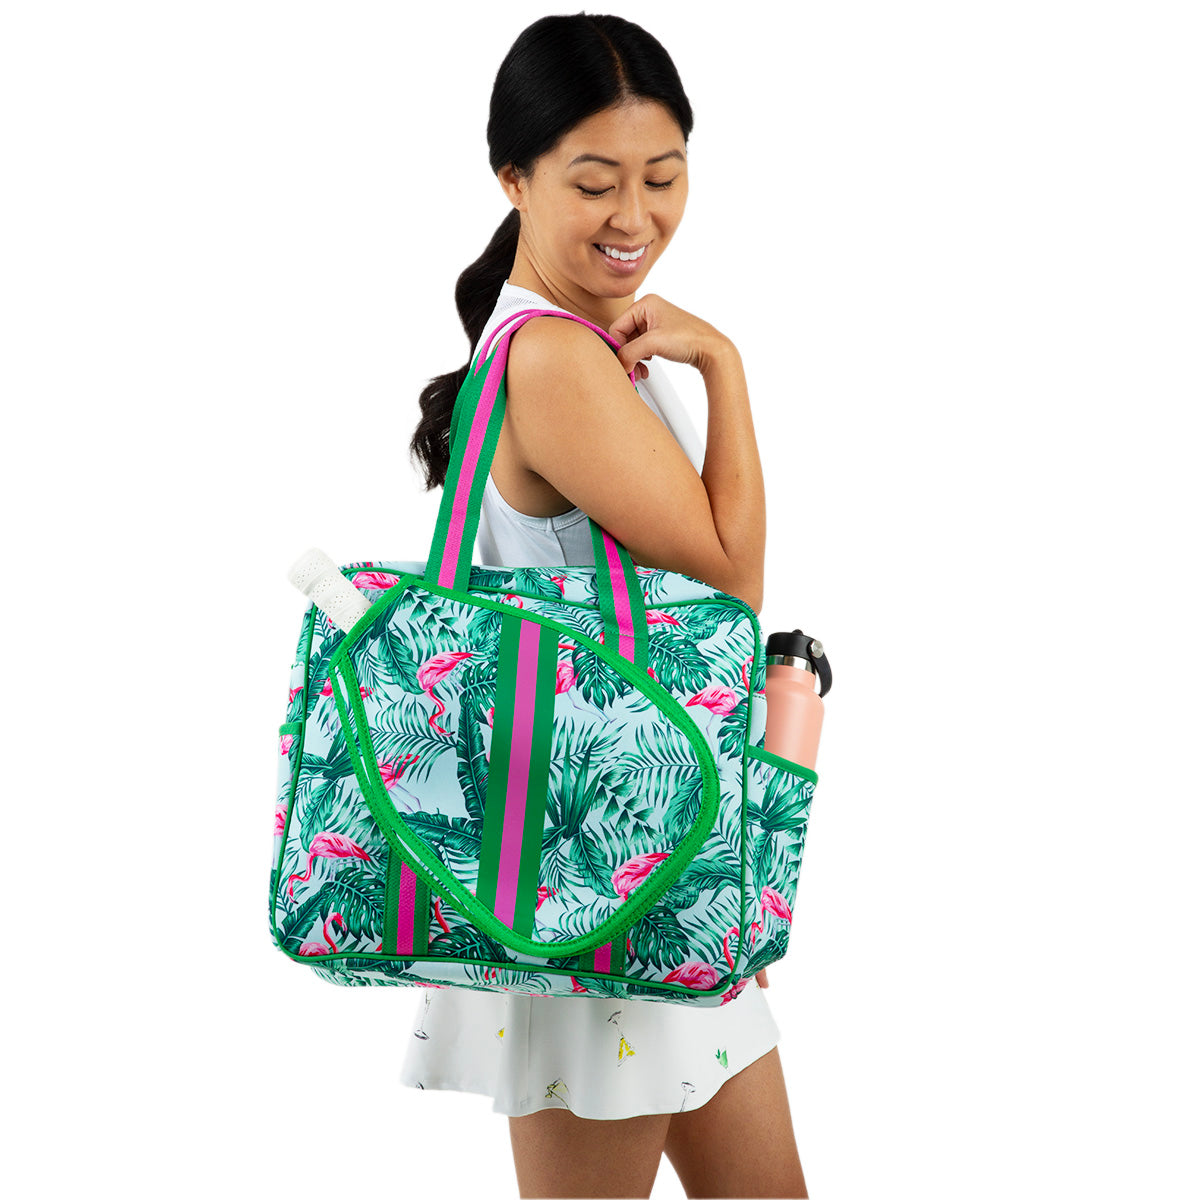 Green and Pink Flamingo Pickleball Bag with Built-in Fence Hook